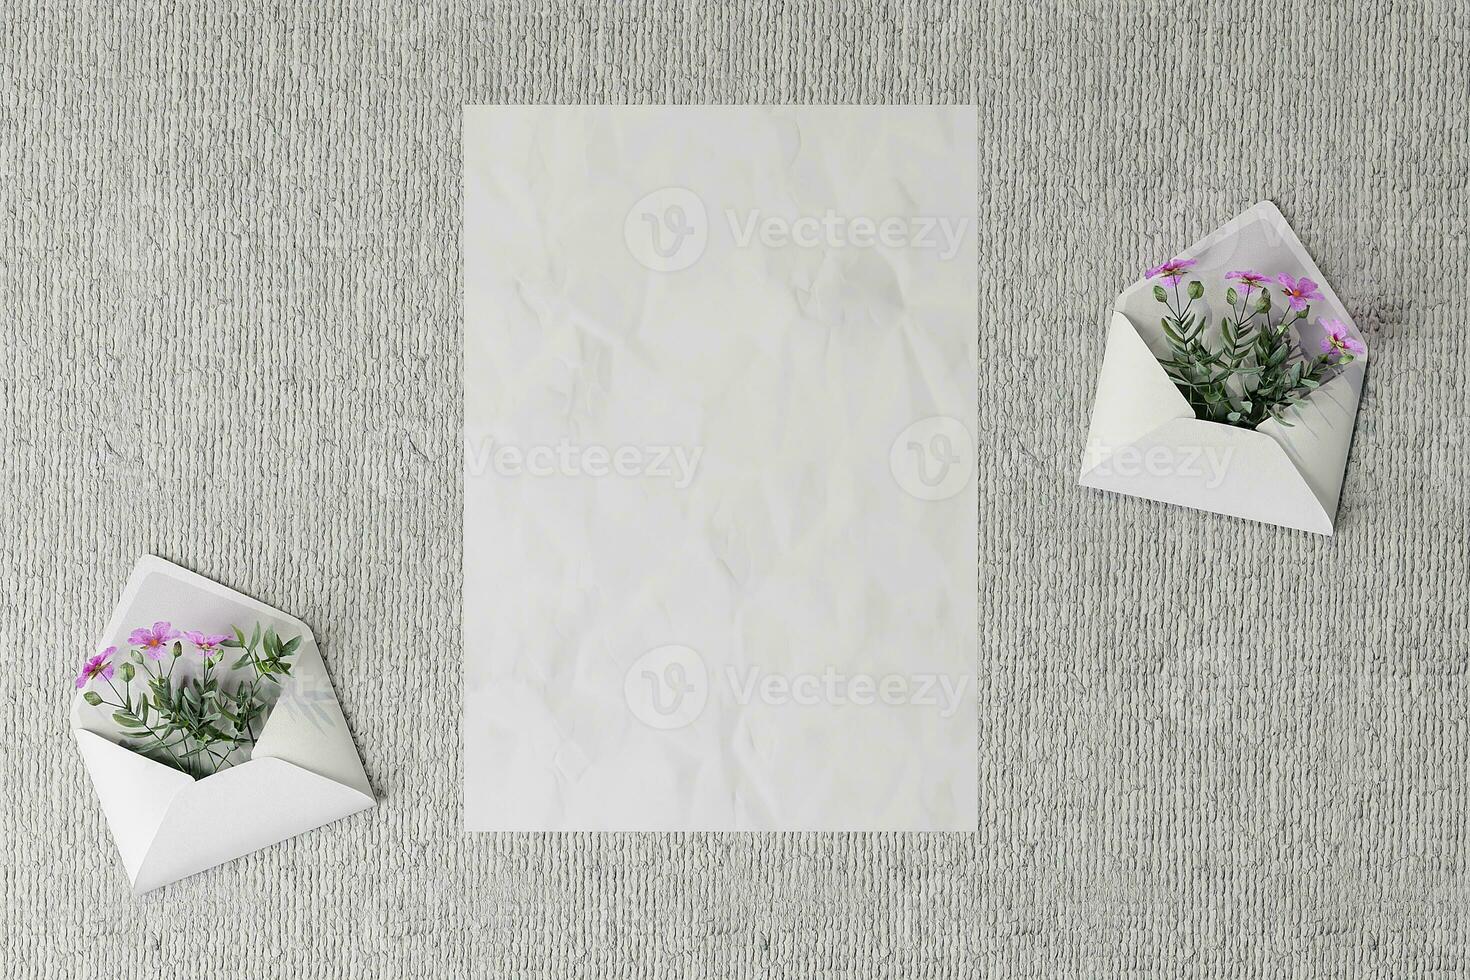 Poster mockup rustic natural with plants in envelopes photo